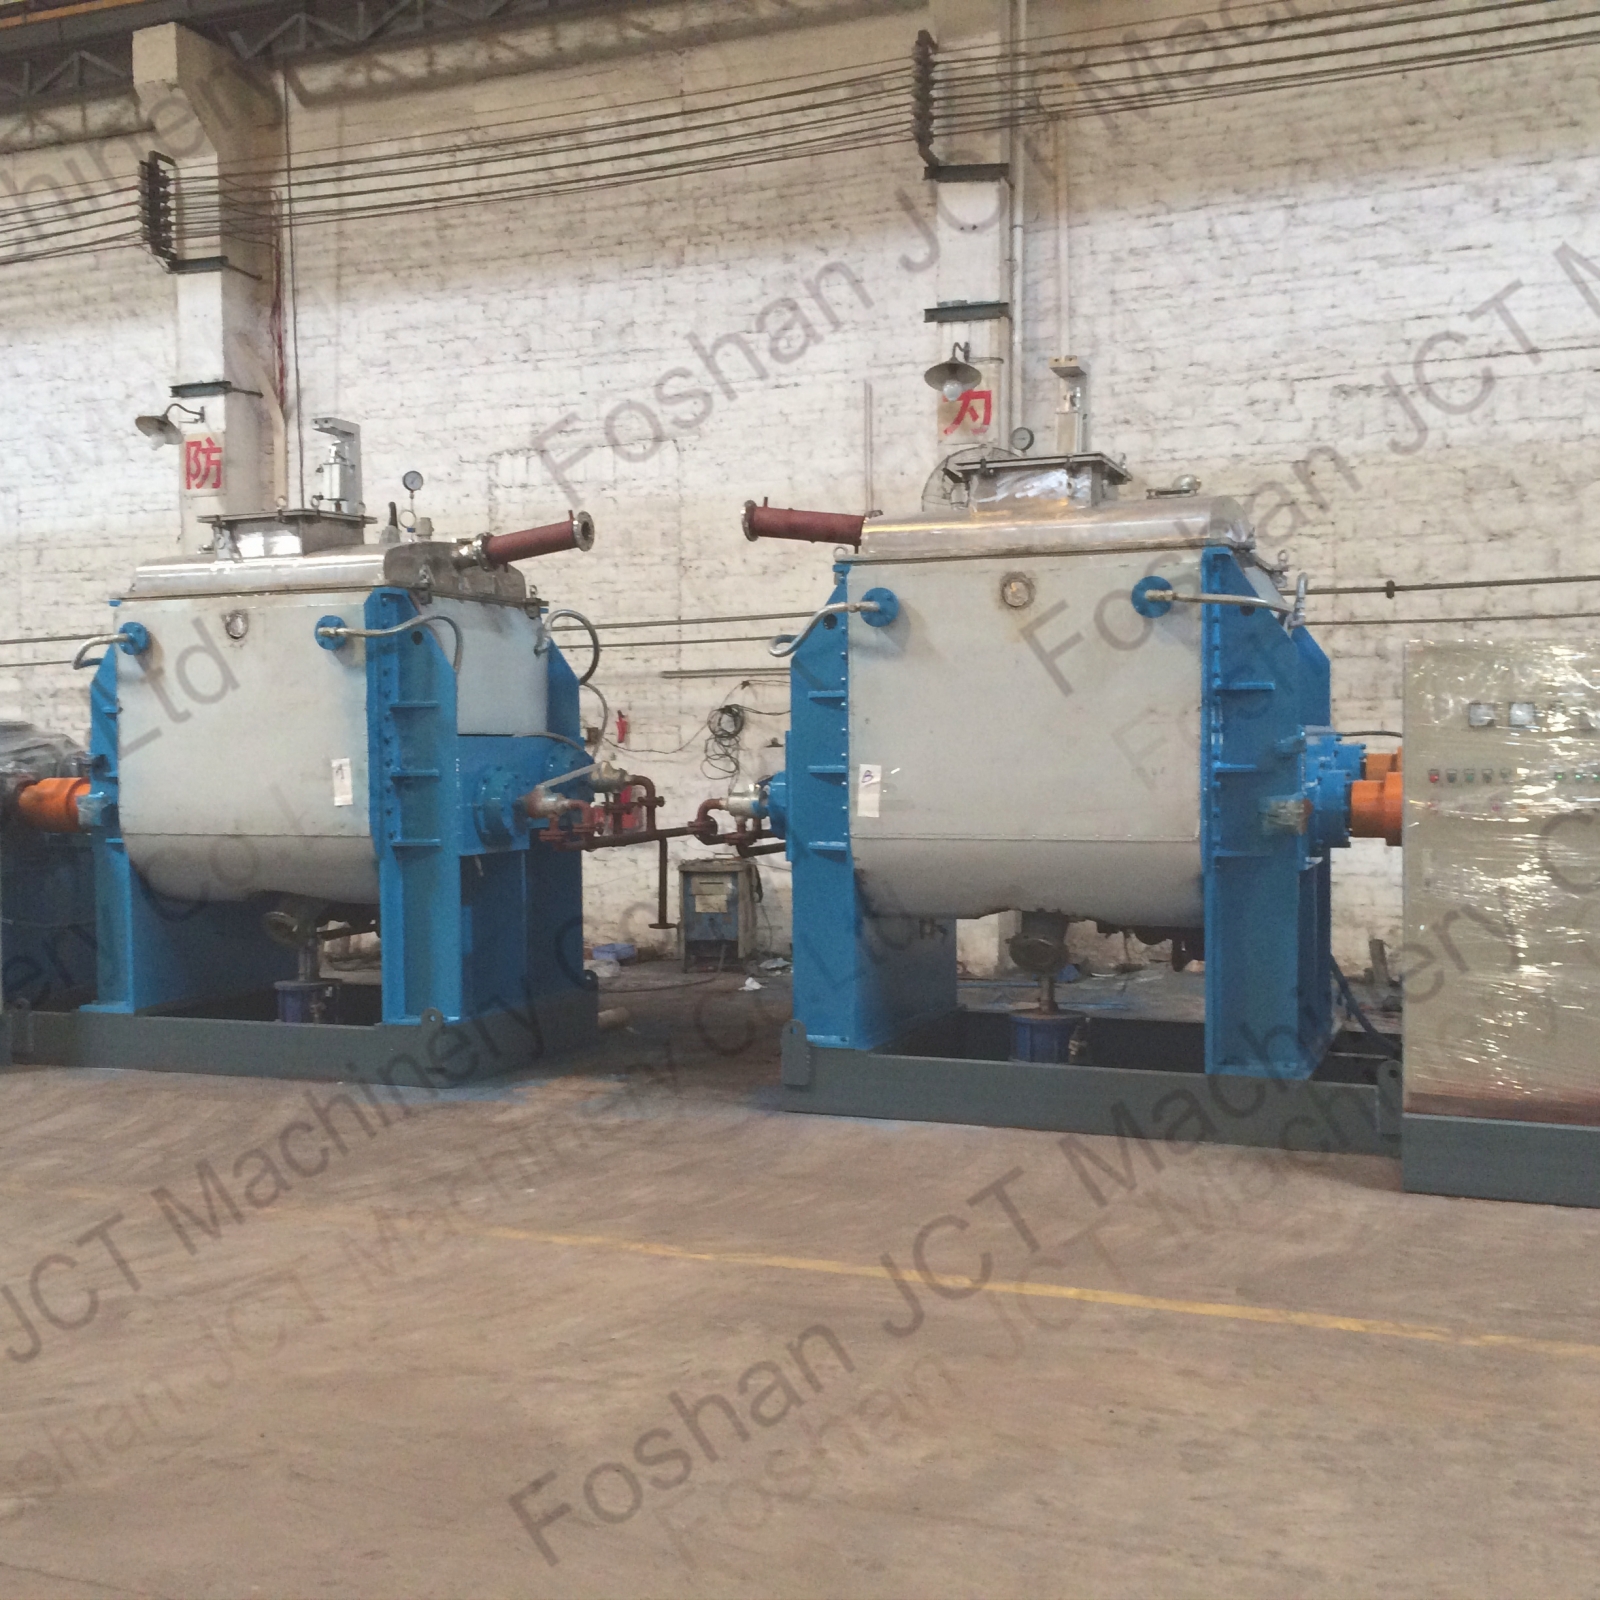 Do you know about industrial rubber extruder machinery?